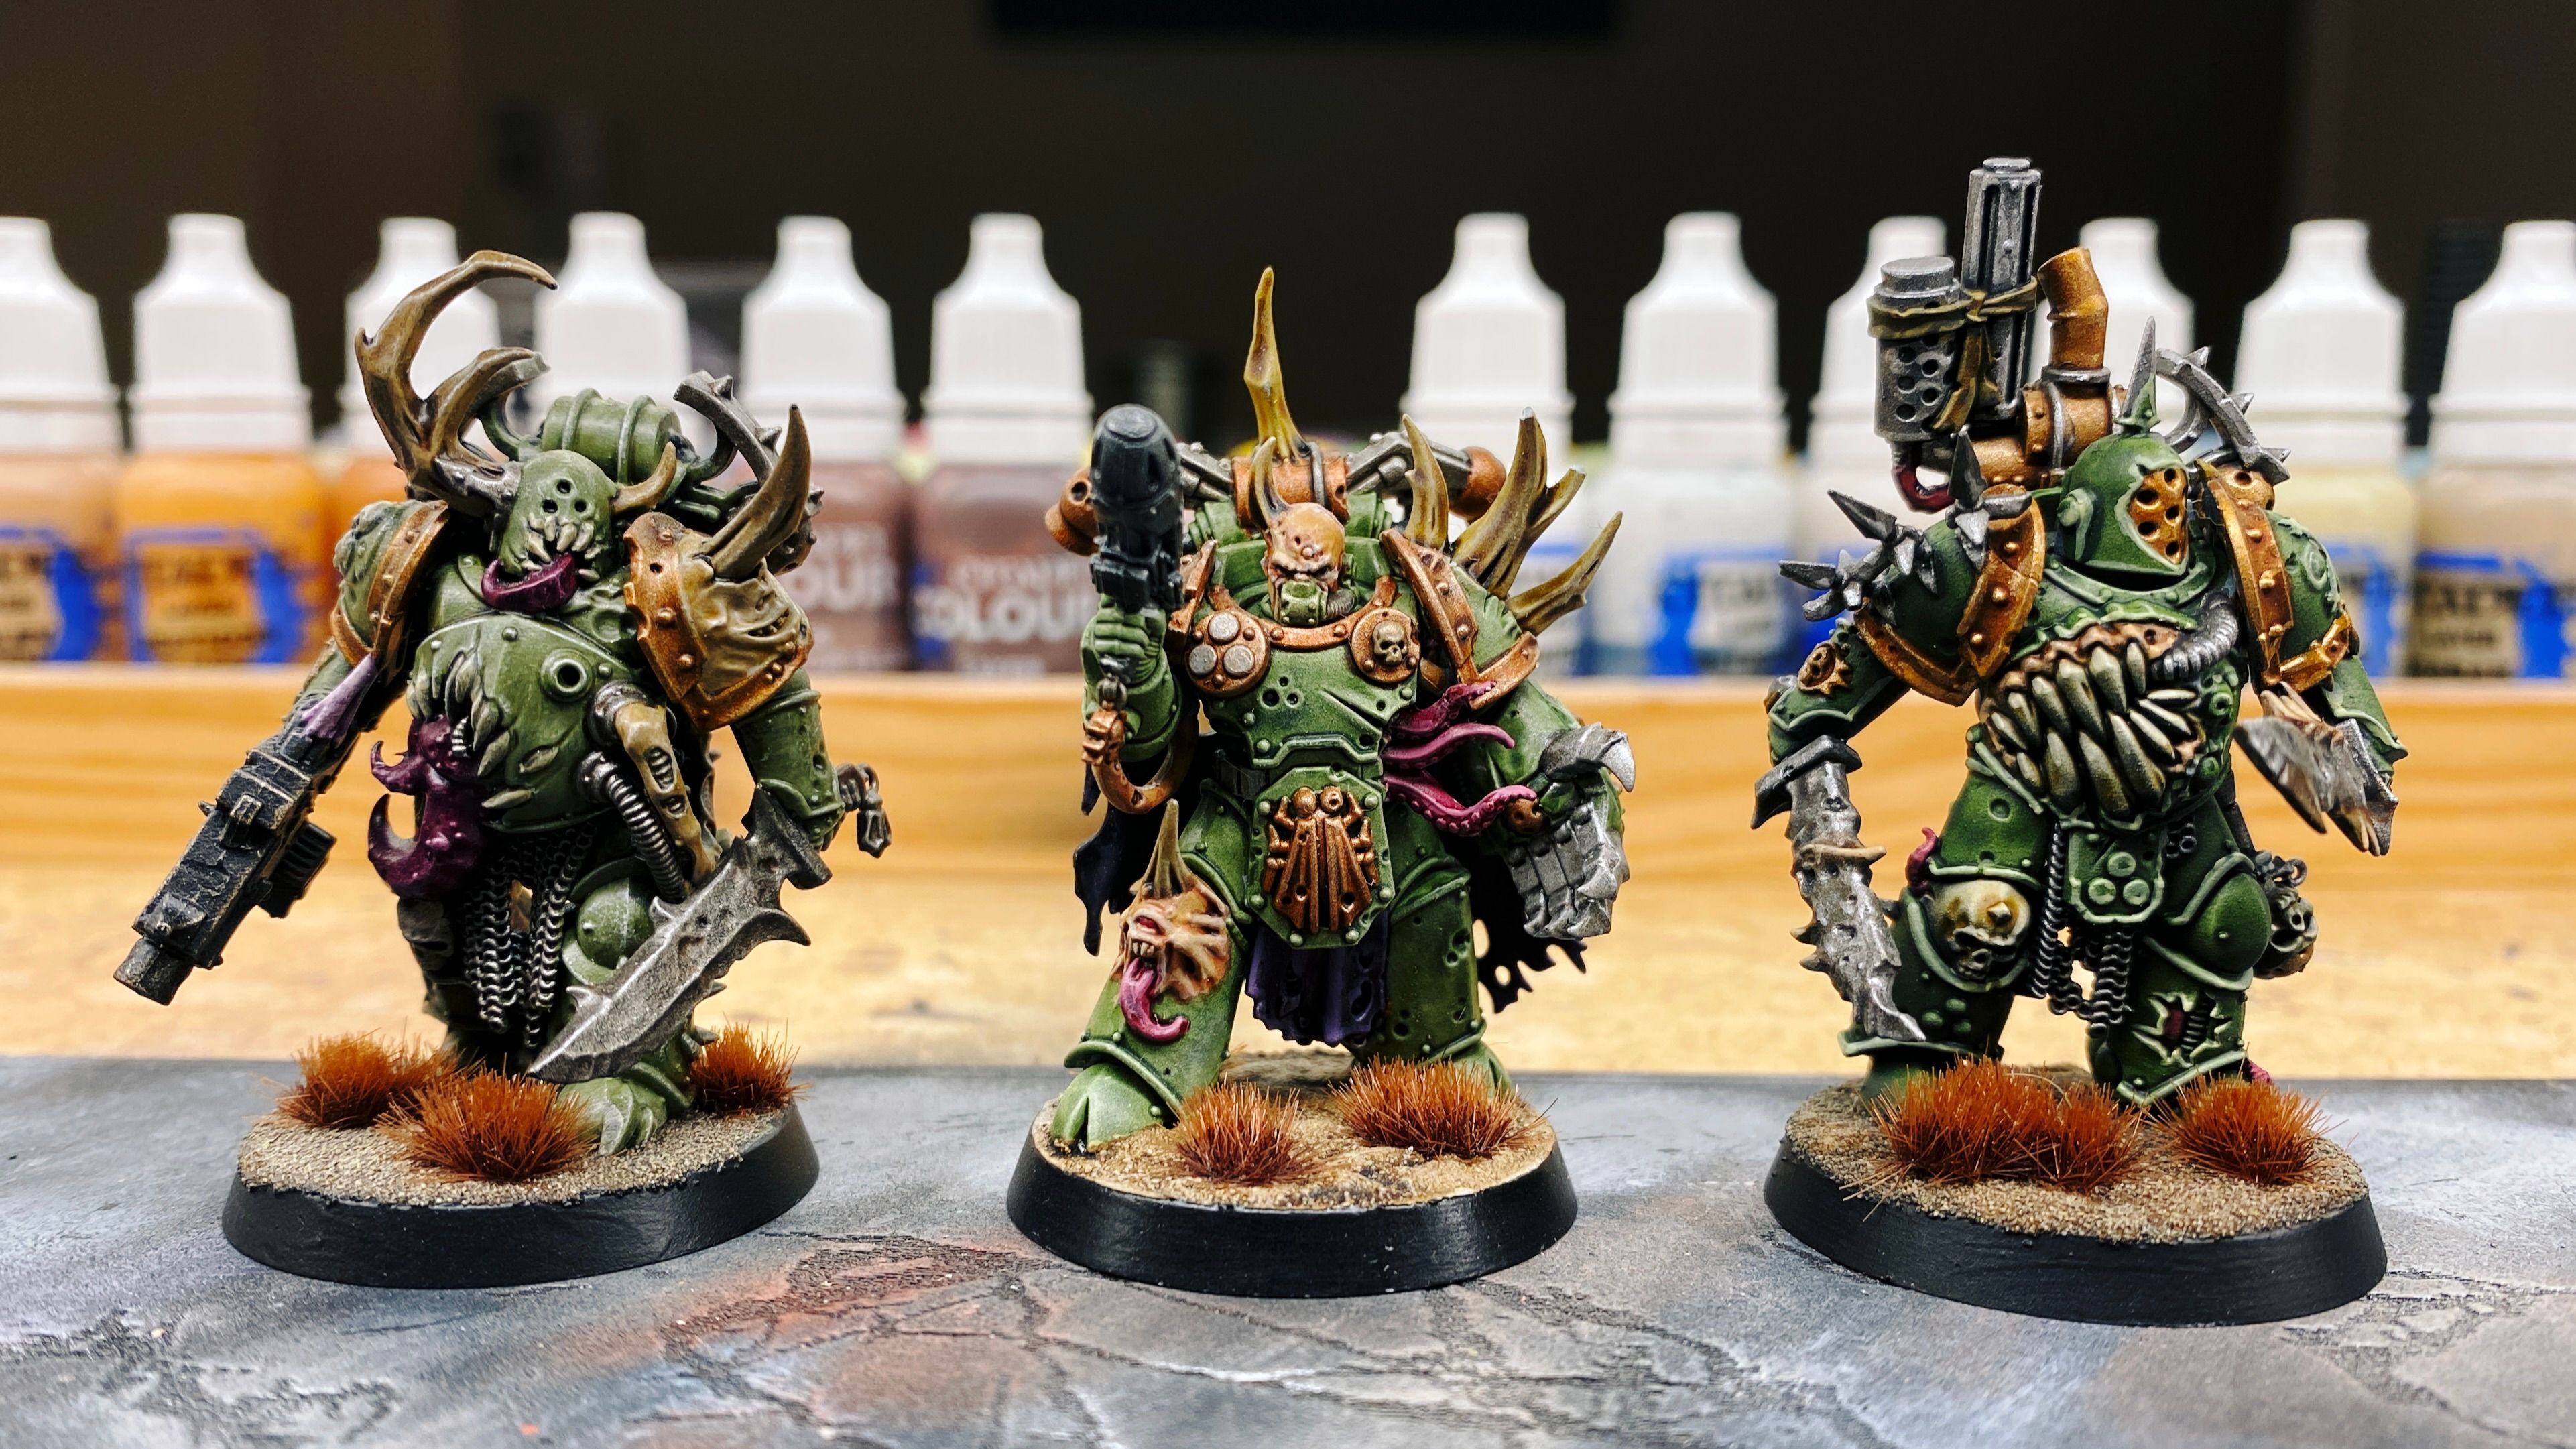 A photo of three Plague Marines in a line. They're all in the same general khaki green armour, but the one on the left is fairly dull-looking without too much highlighting since it was my old regular-paints painting technique where the highlighting was done with drybrushing. The one in the middle has come out a brighter green because the underlying primed colour is brighter and also it's the newer "Militarum Green" Contrast paint so the primed colour has a lot more effect on the finished product. And finally we have the one in the previous photo with the two knives that has much more emphasised shadows and much punchier highlights thanks to the zenithal highlight and manual highlighting.